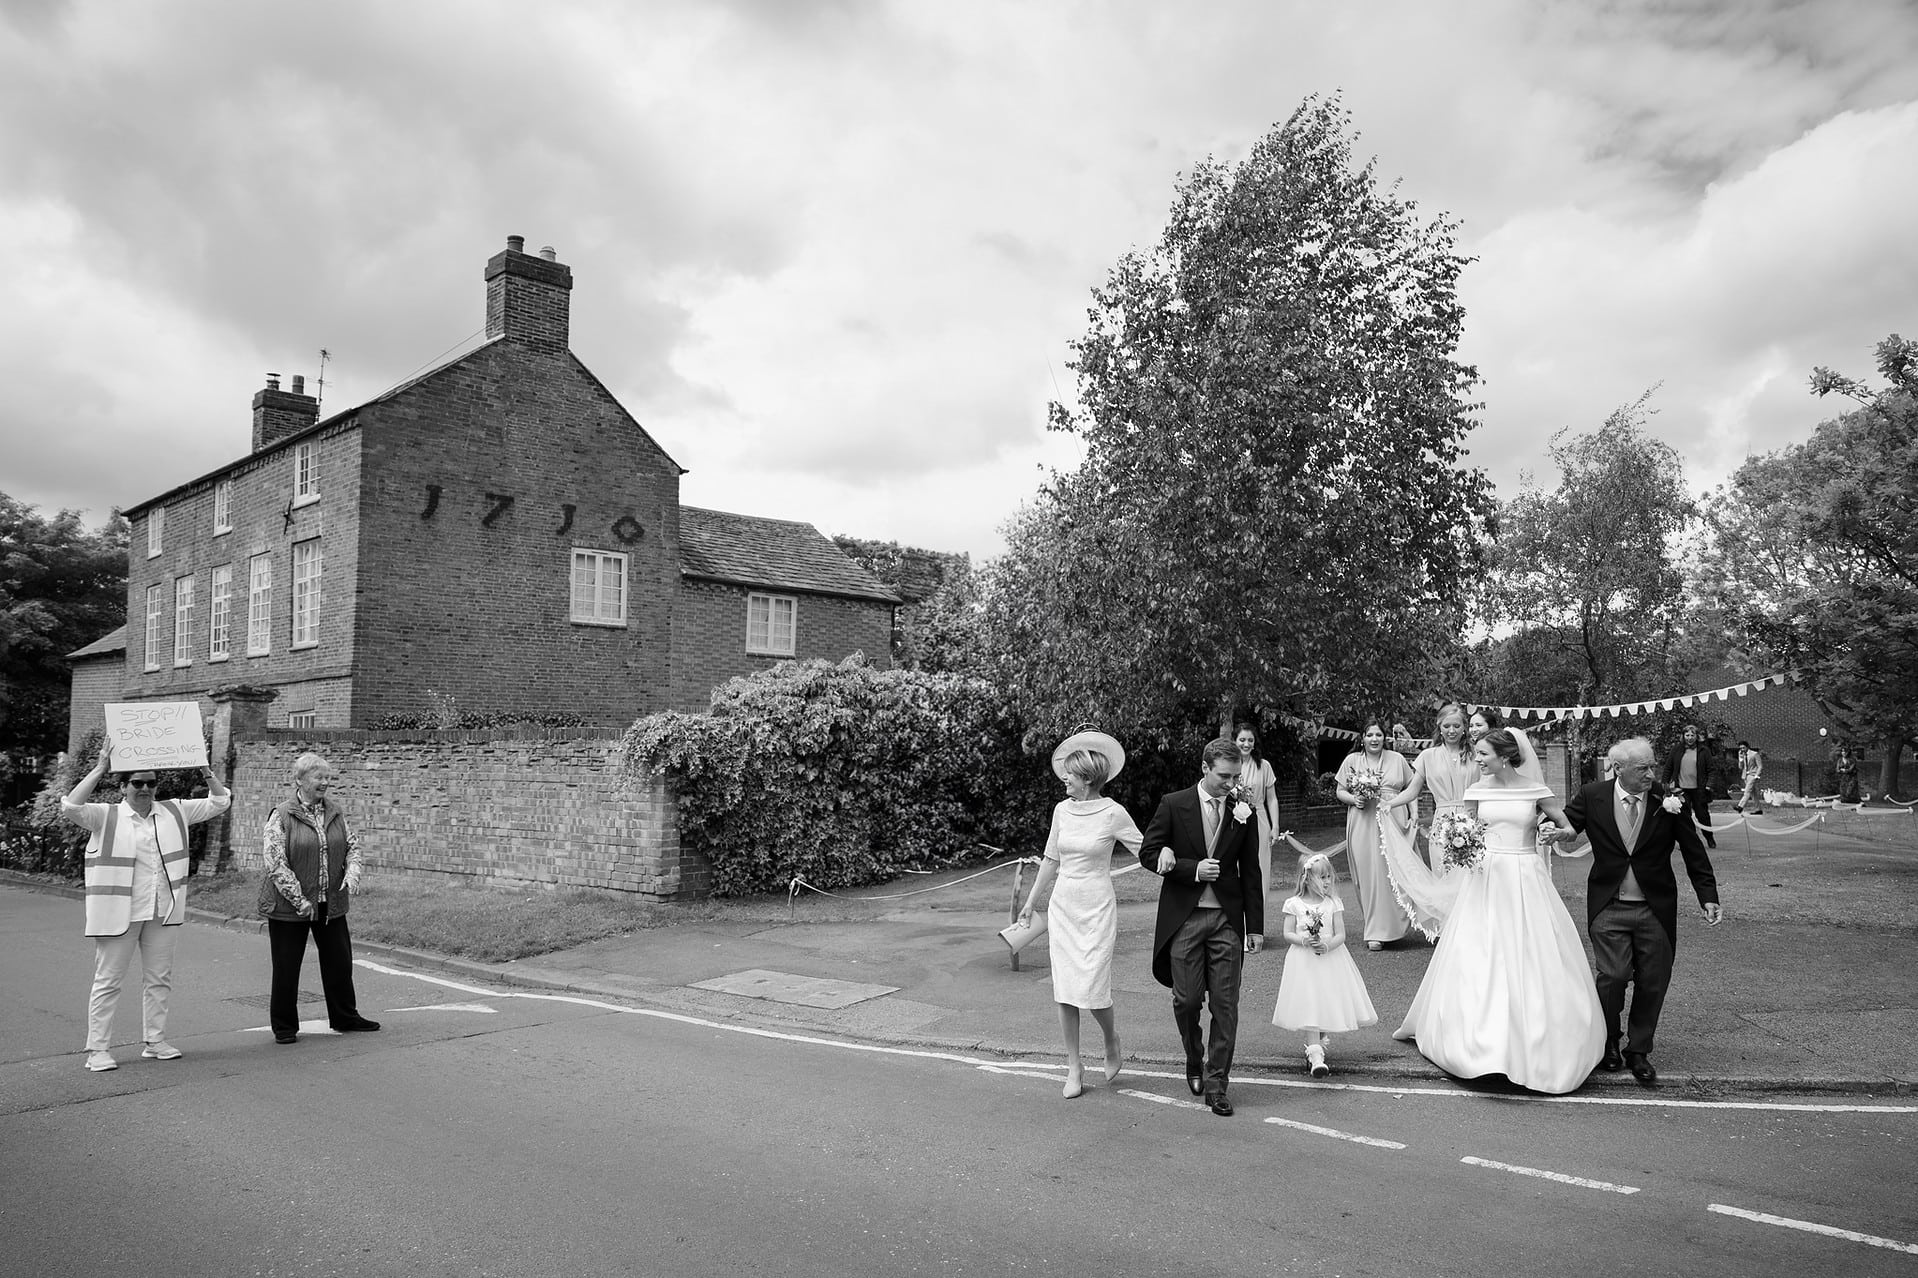 A neighbour holding up a 'Stop, Bride Crossing' sign as the bride and her entourage cross the road